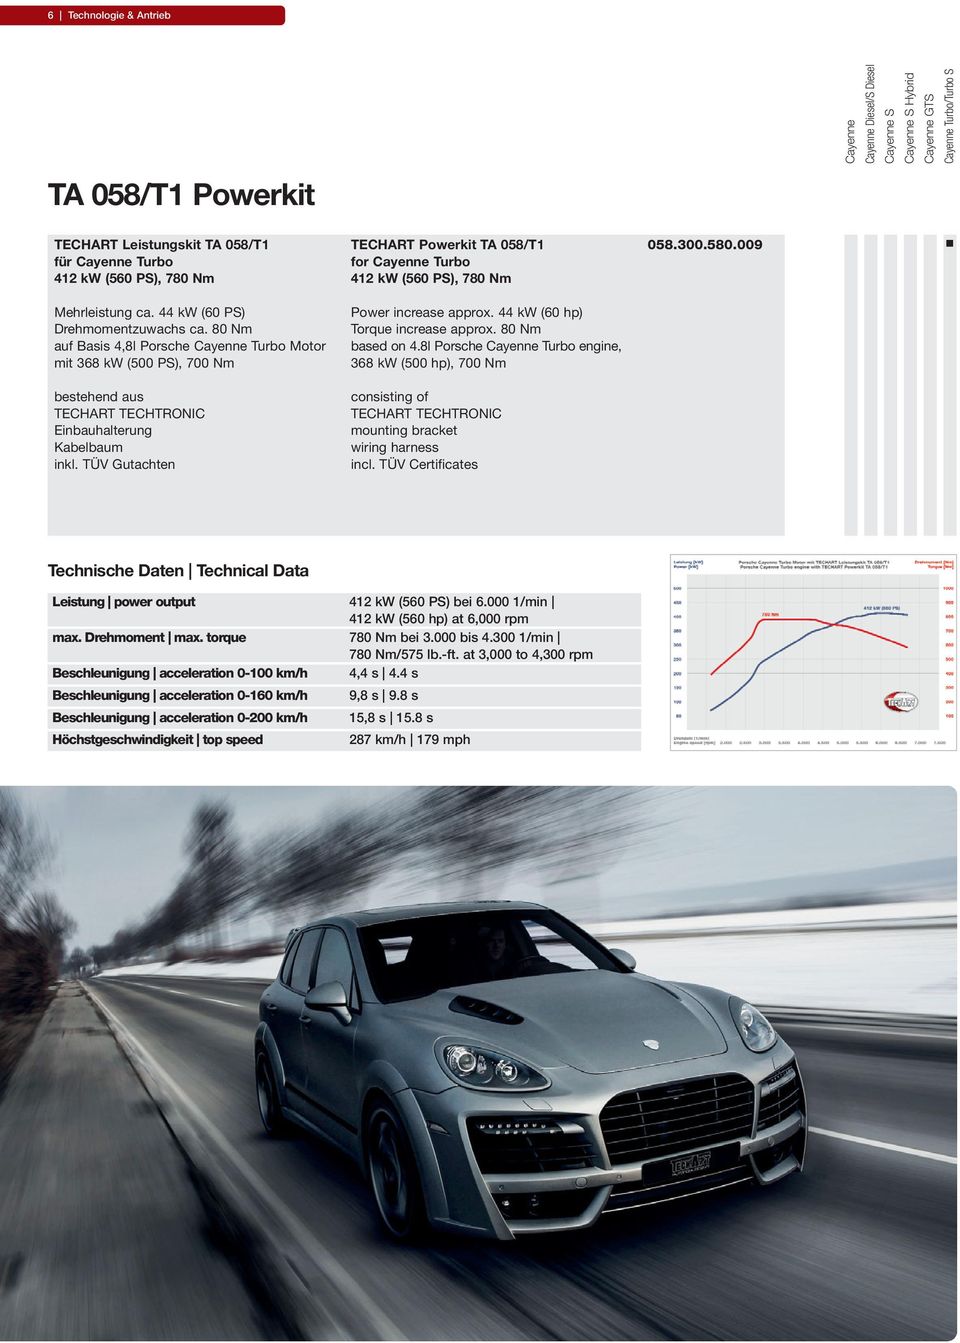 TÜV Gutachten TECHART Powerkit TA 58/T for Cayenne Turbo 4 kw (56 PS), 78 Nm Power increase approx. 44 kw (6 hp) Torque increase approx. 8 Nm based on 4.